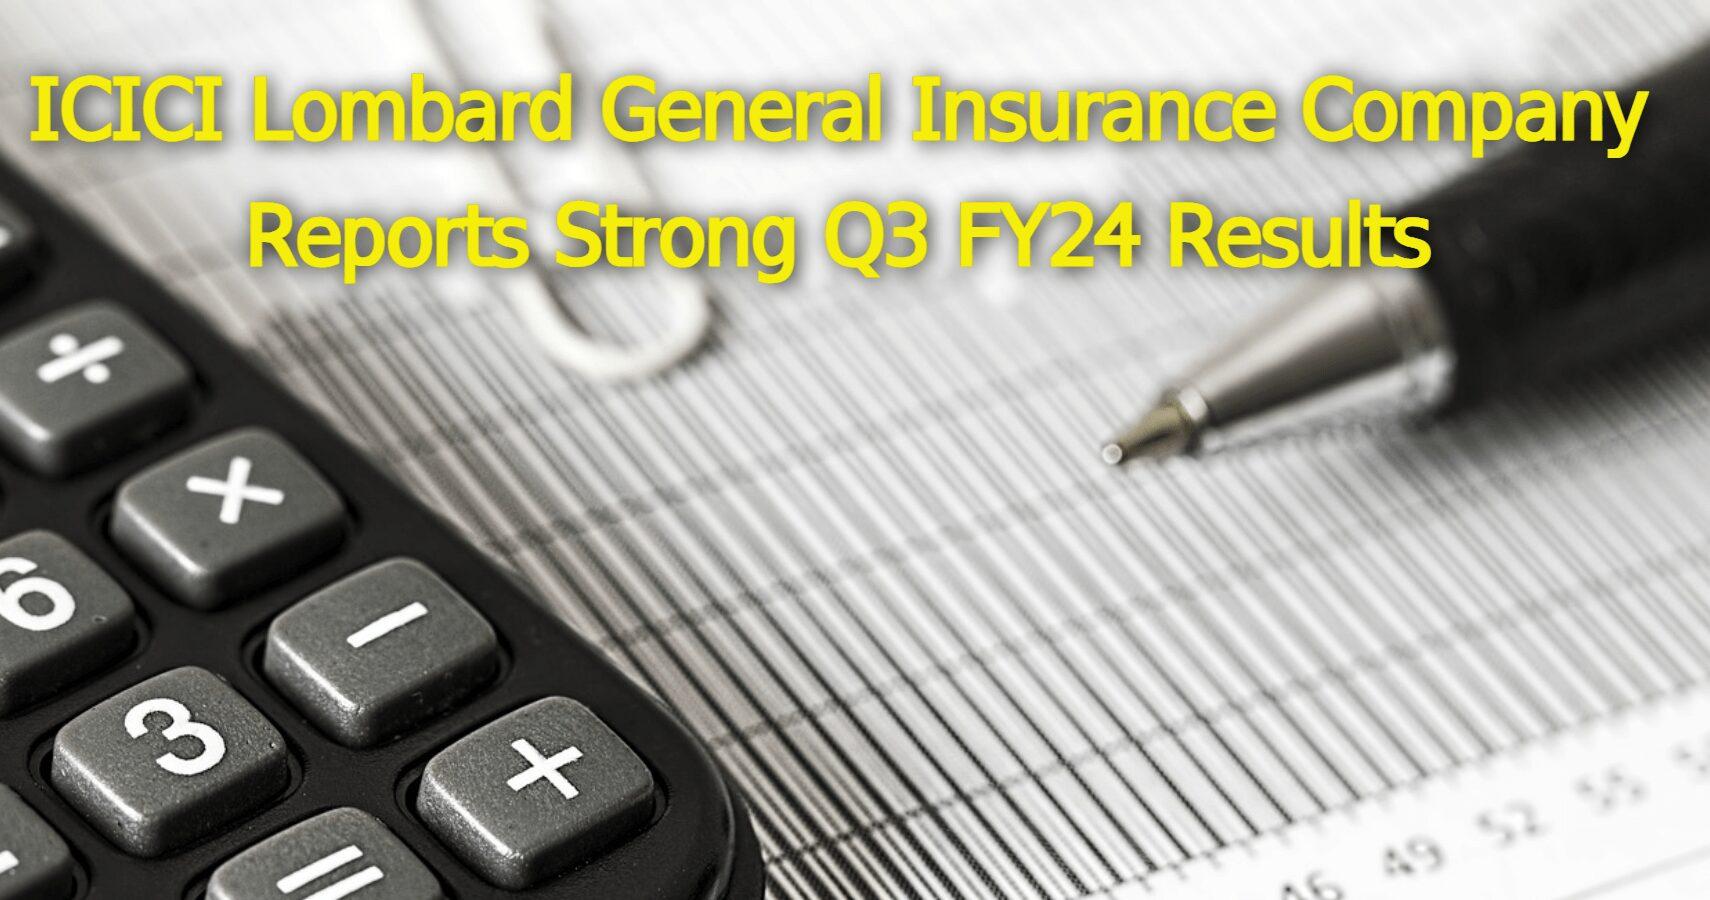 ICICI Lombard General Insurance Company Q3 FY24 Results